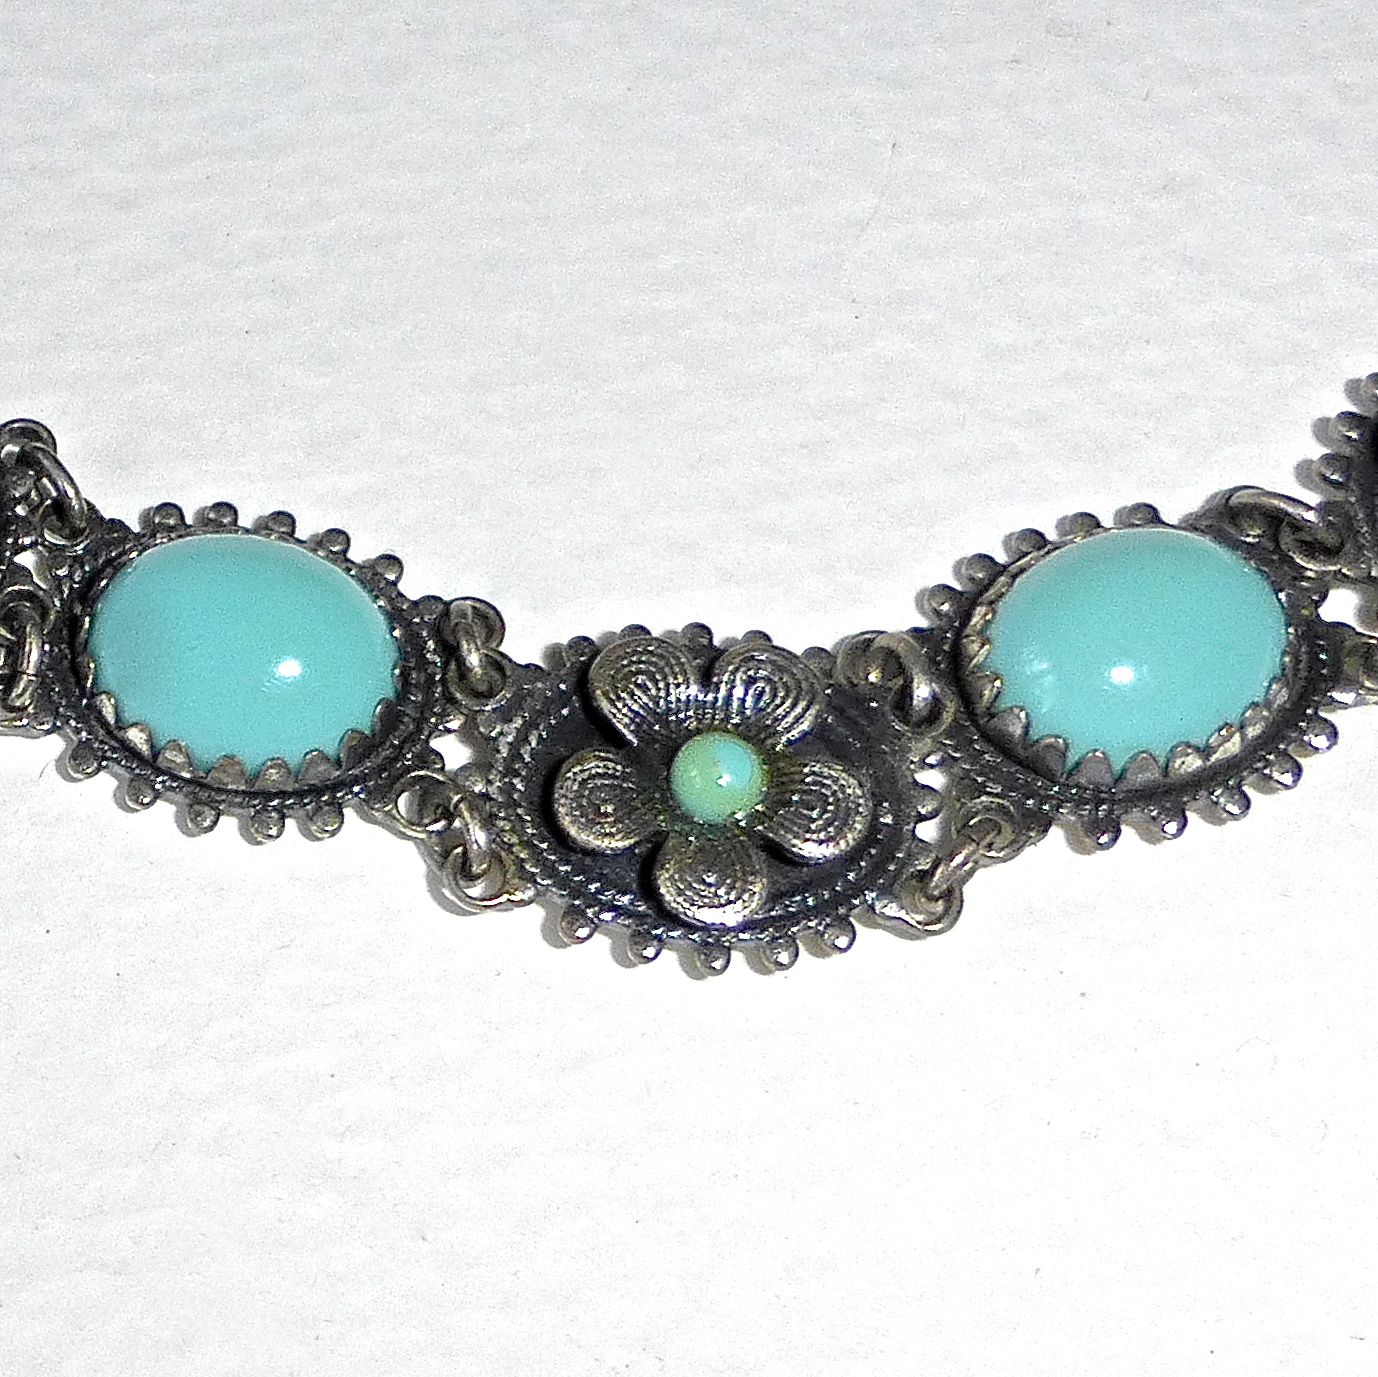 Silver Metal Faux Turquoise Costume Bracelet from bejewelled on Ruby Lane